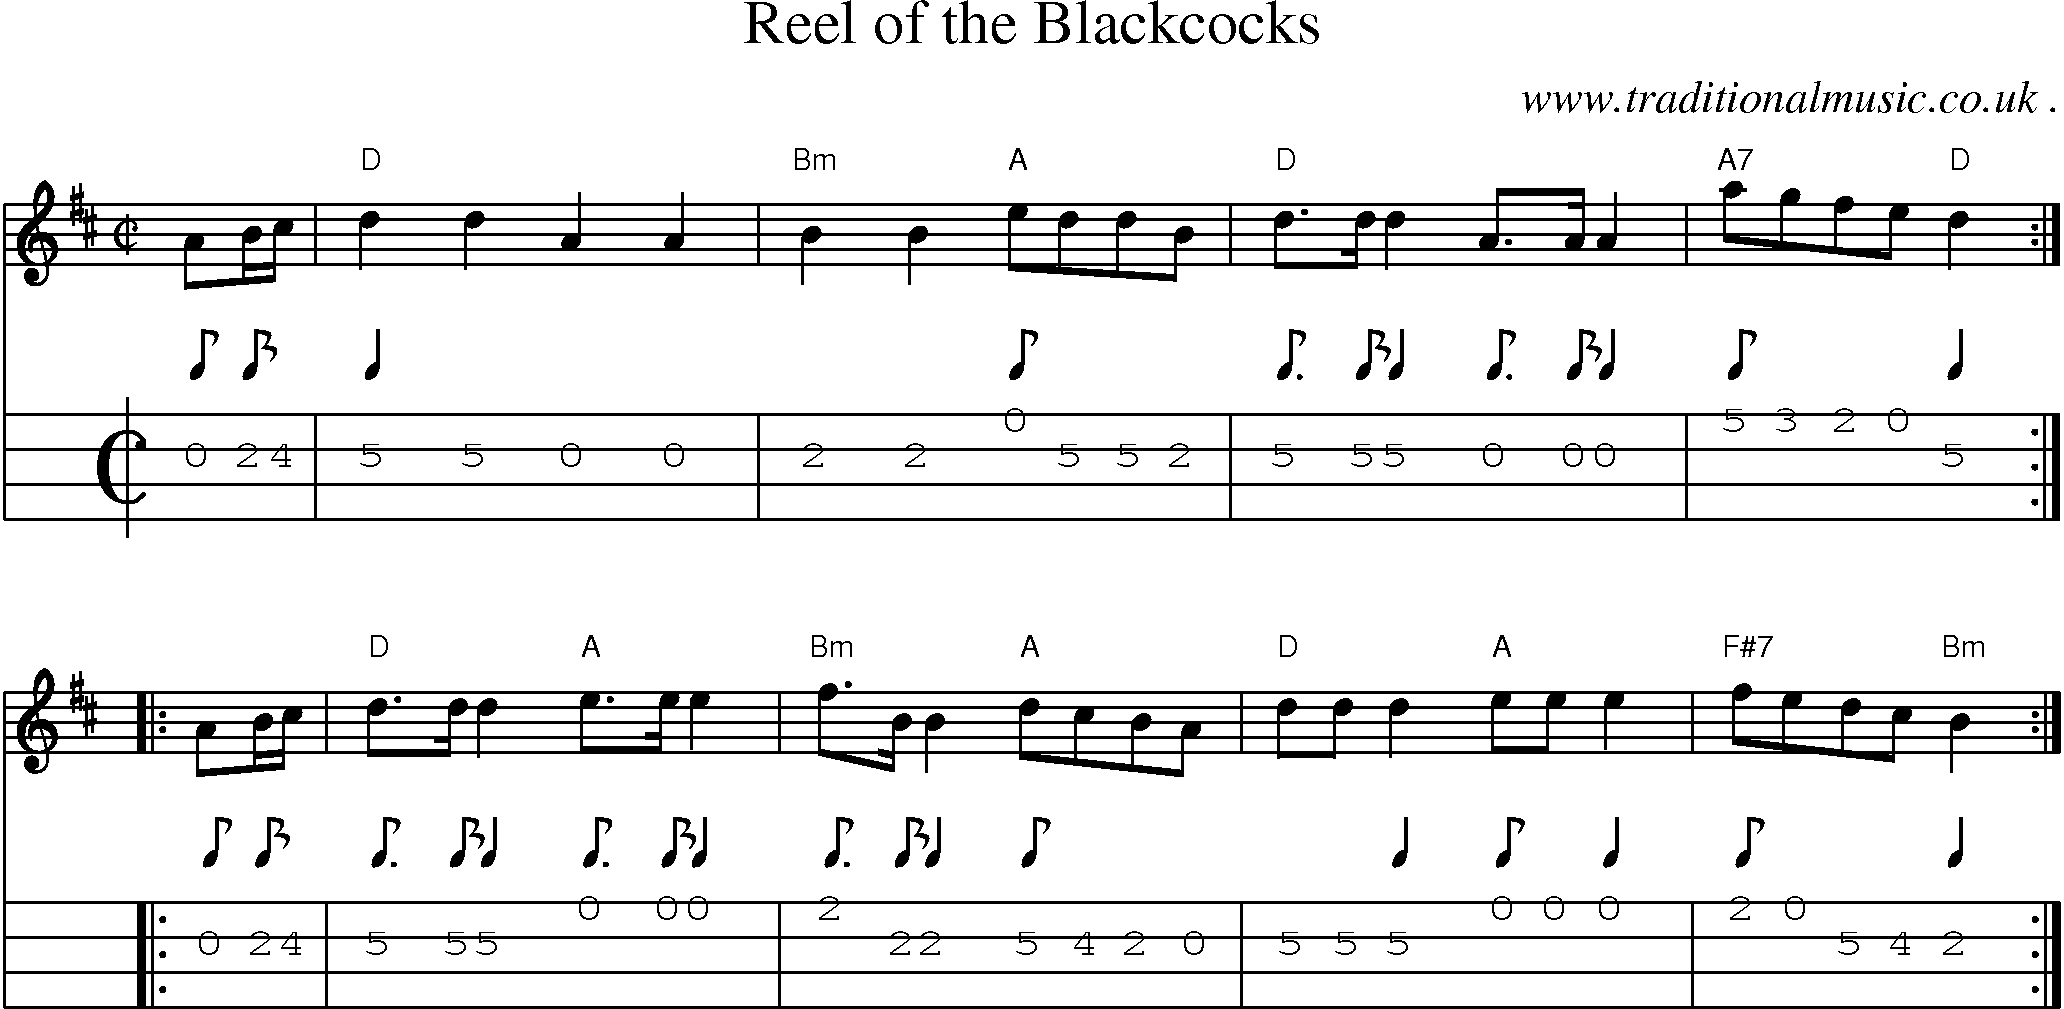 Sheet-music  score, Chords and Mandolin Tabs for Reel Of The Blackcocks